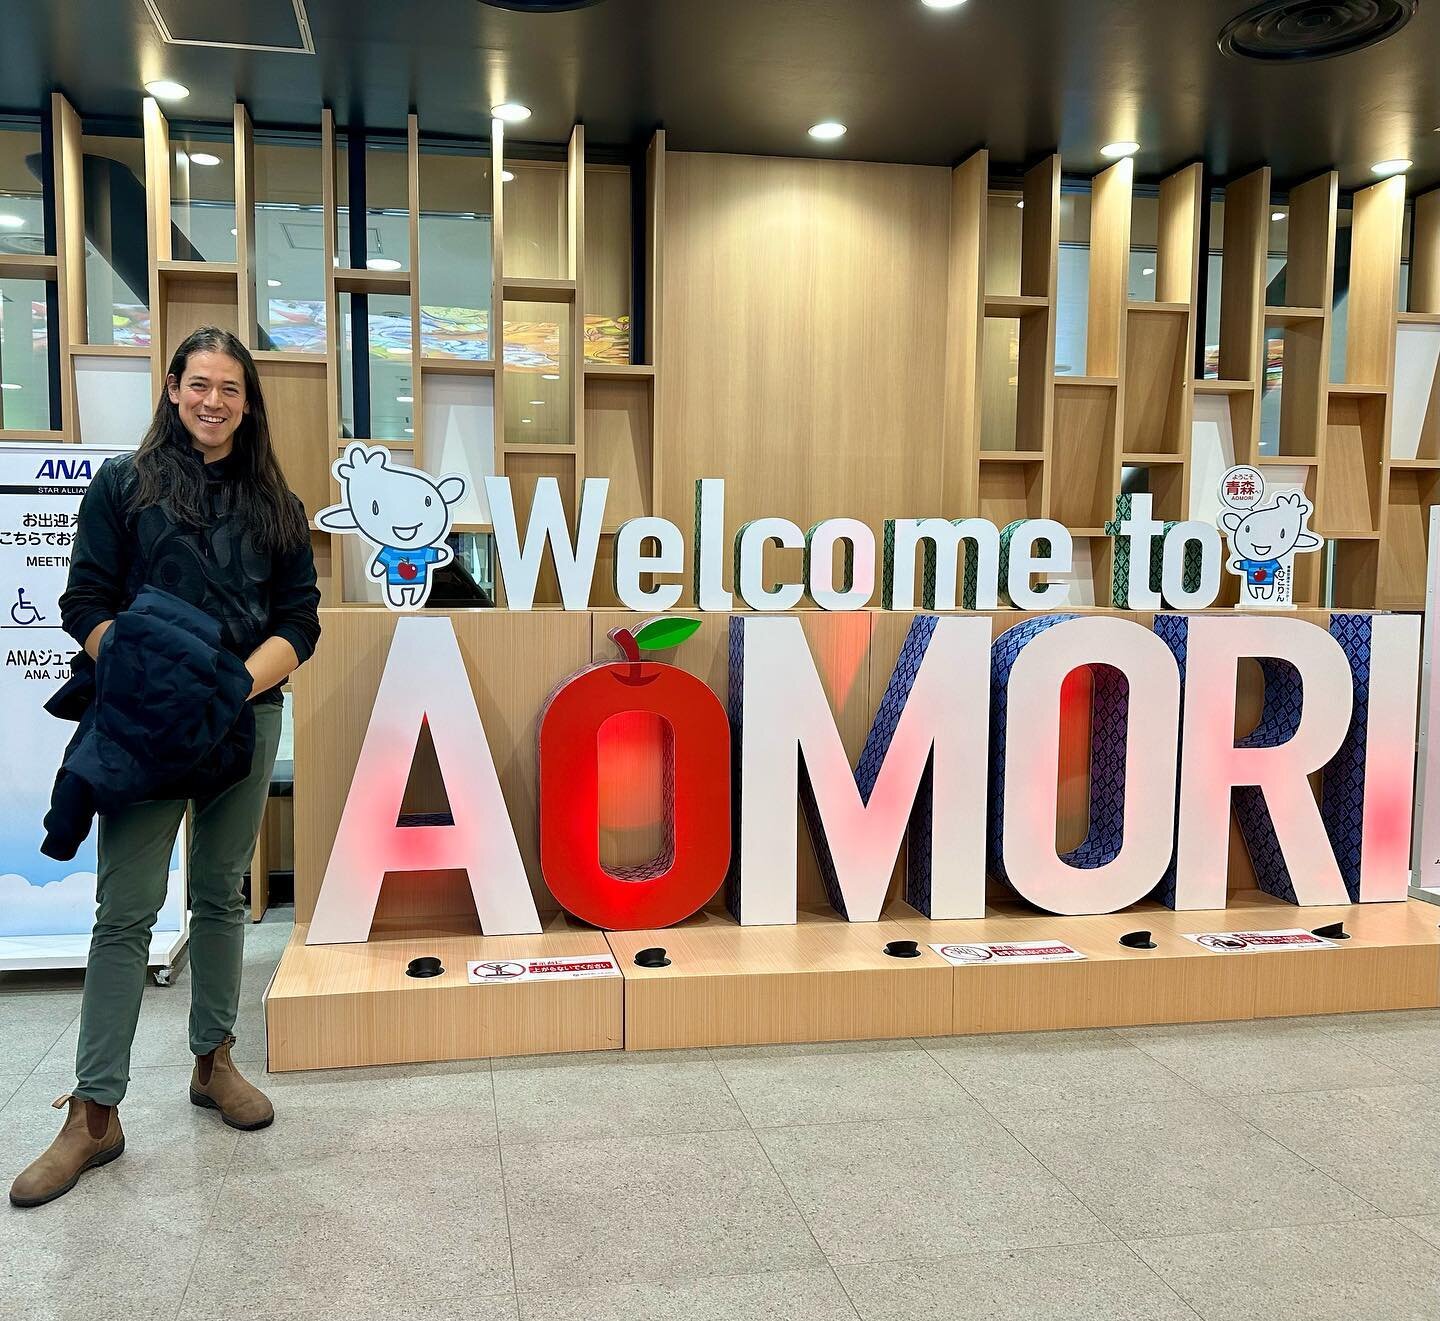 Aomori Part 1 青森県 🍎🍏❄️
 
As we all departed for our local prefectures, I'm grateful we had the opportunity to go to Aomori. Renowned for apples, abundant nature, delicious food, the Nebuta festival, and much more. While it may be one of the snowies